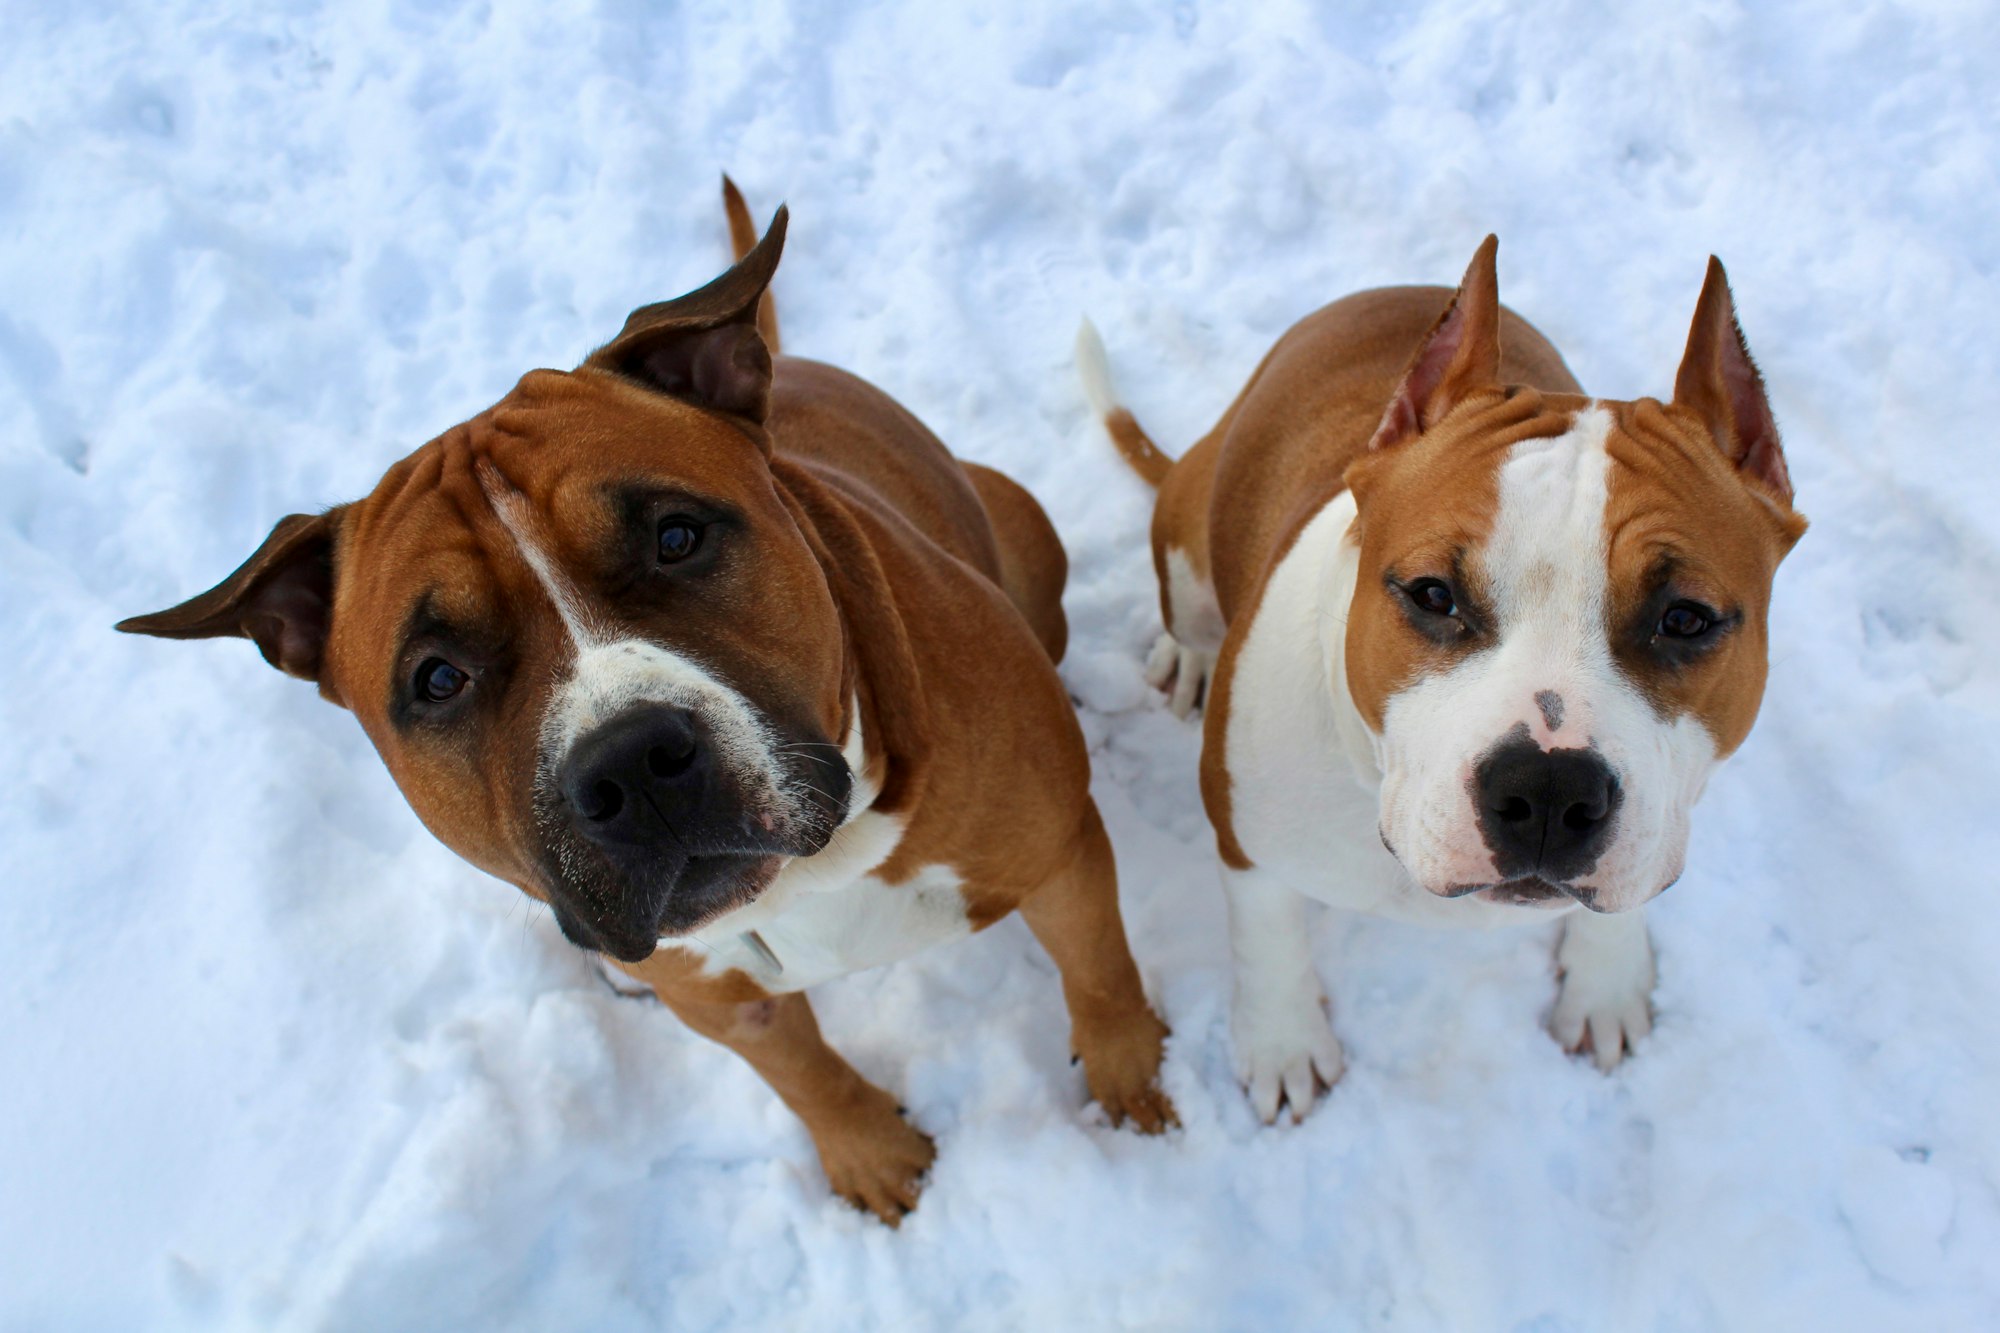 Are American Bulldogs Good Family Dogs?